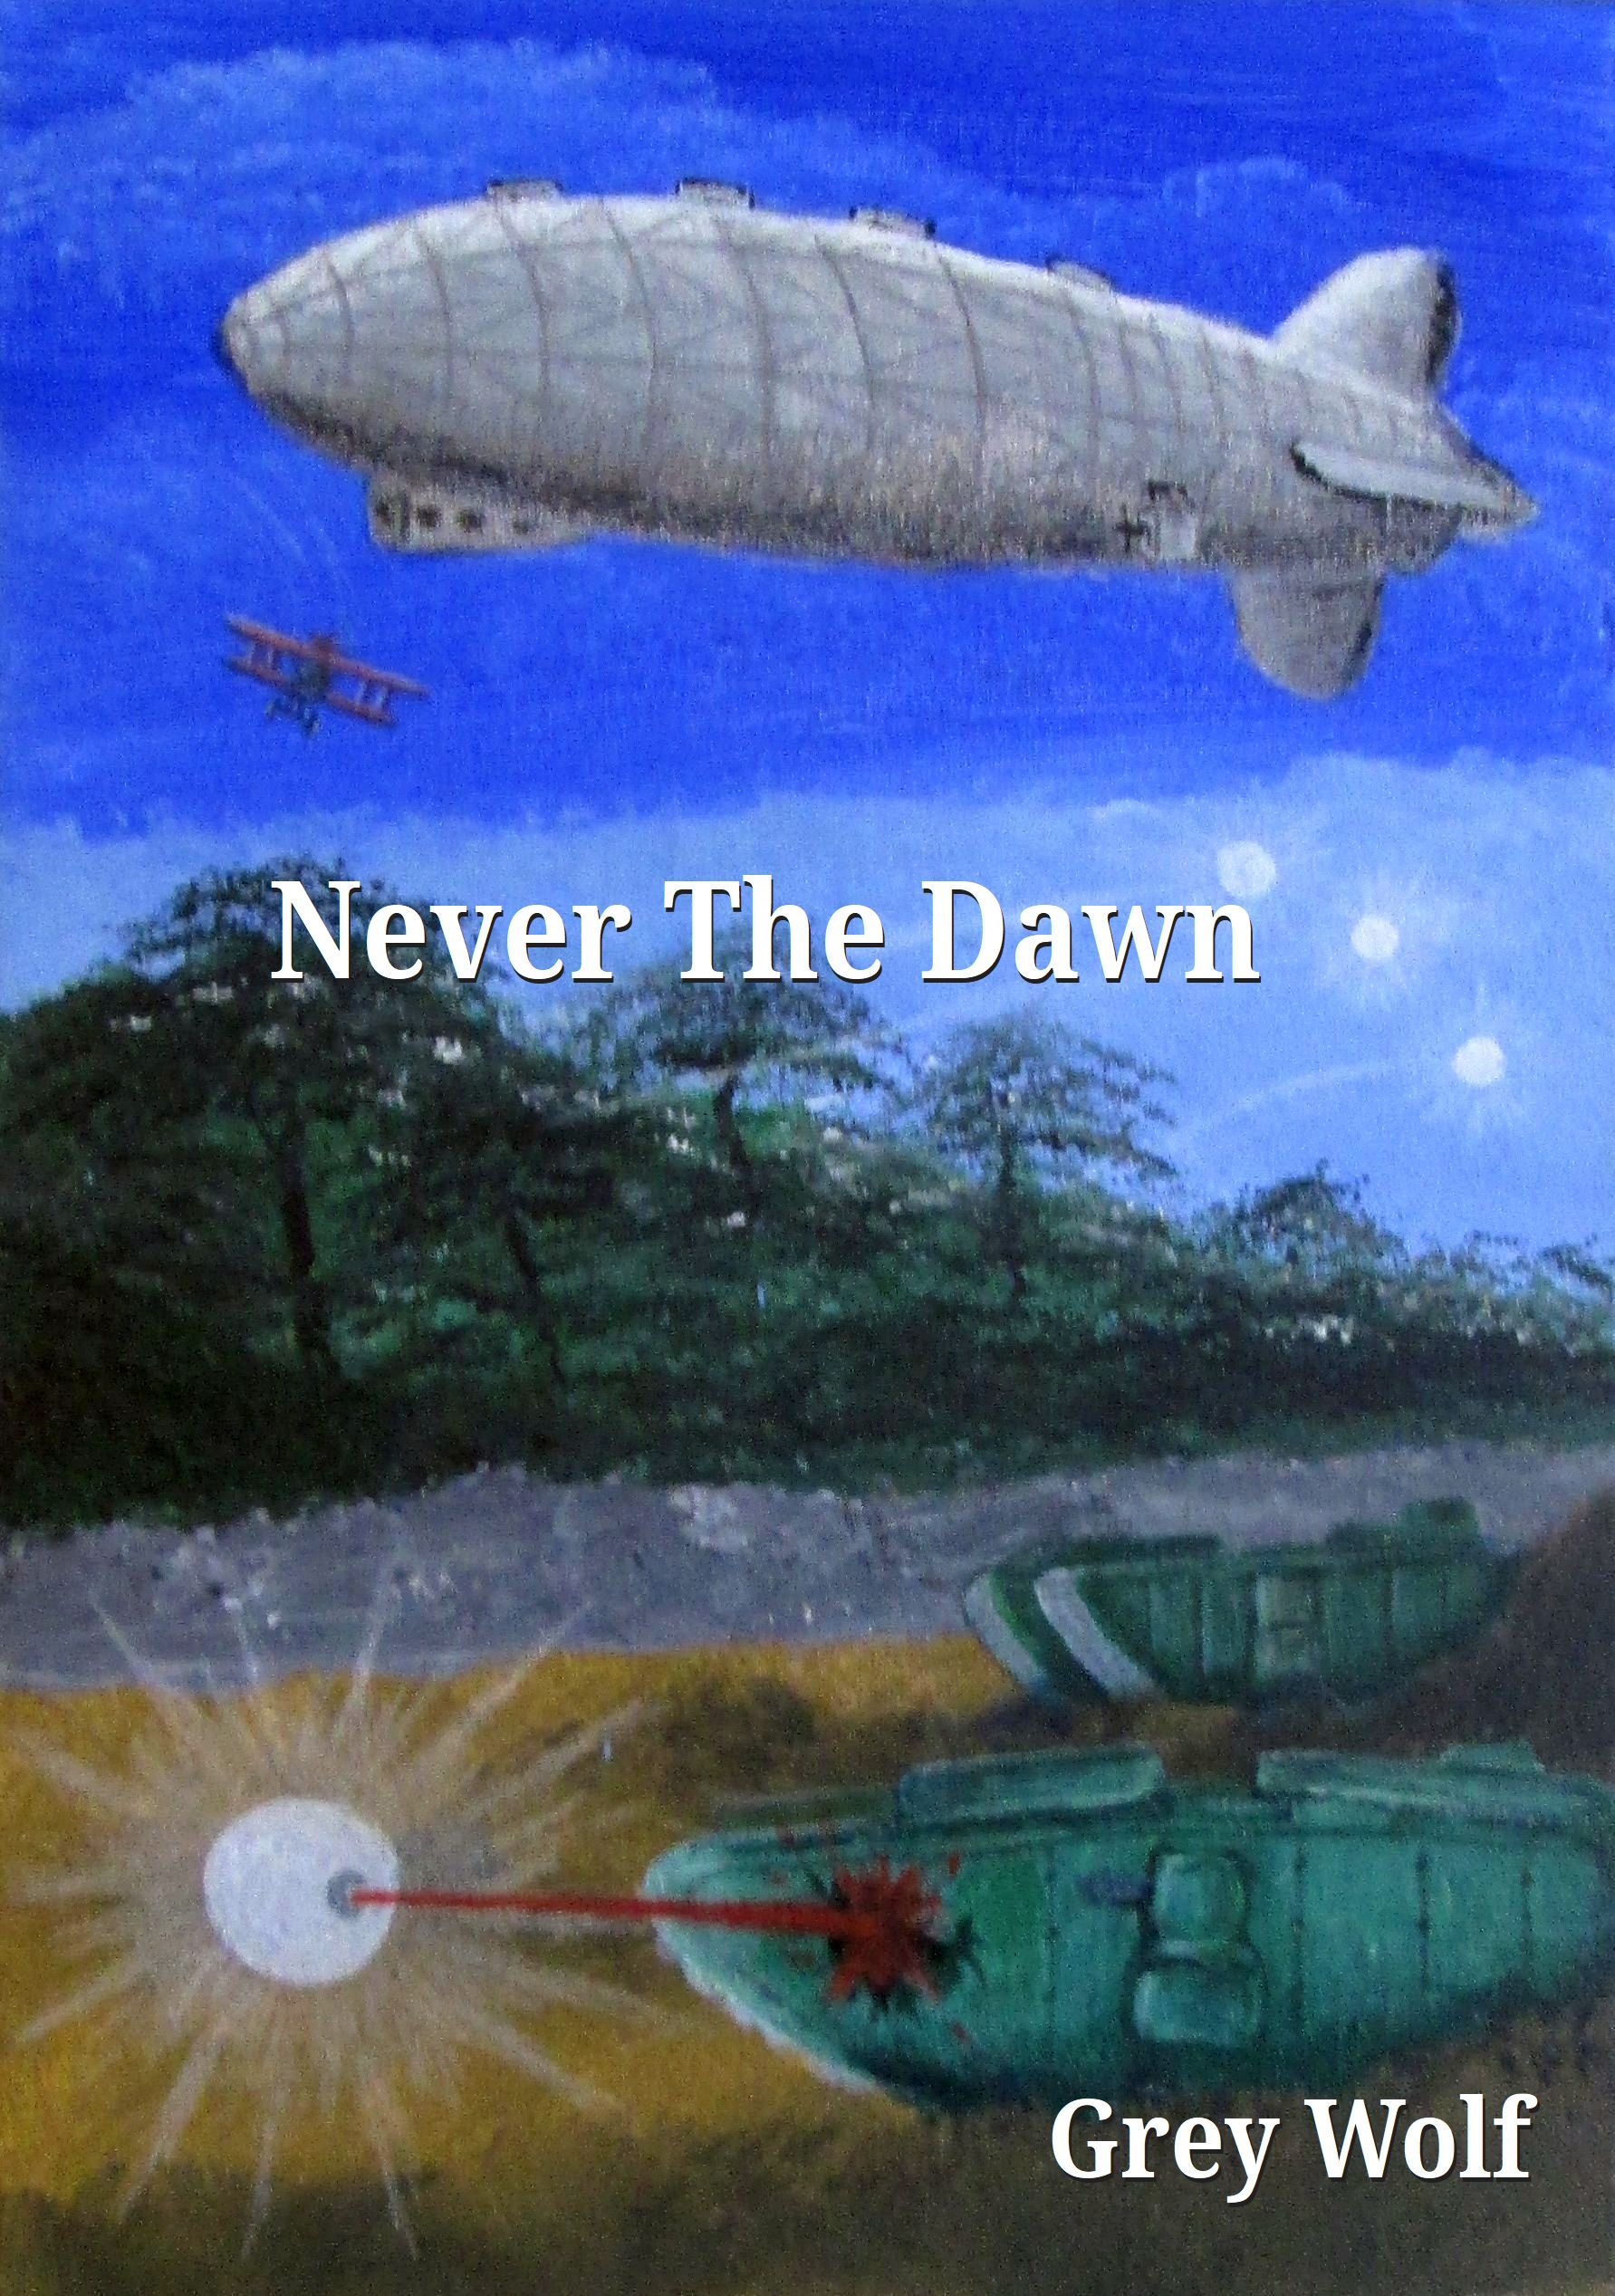 Never The Dawn by Grey Wolf